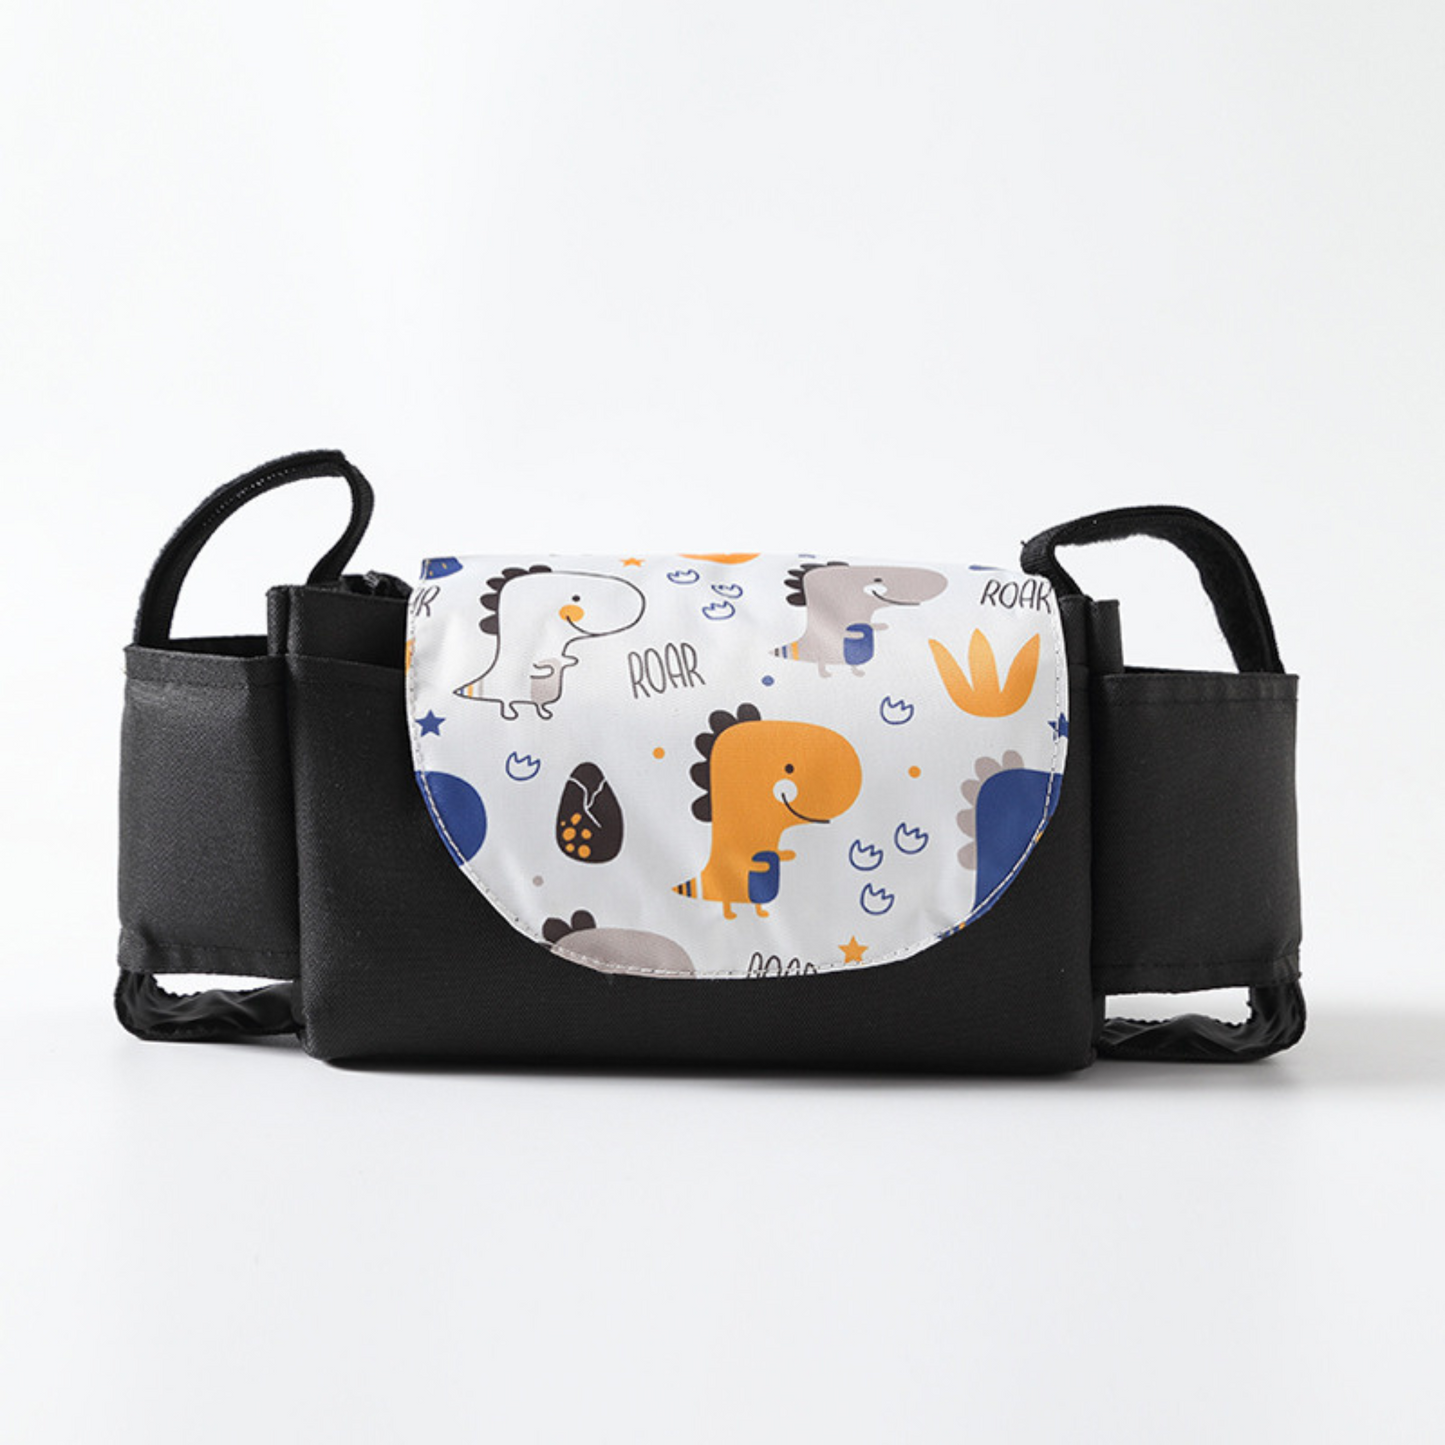 black stroller organizer bag and cup holder with dinosaur print on a white background